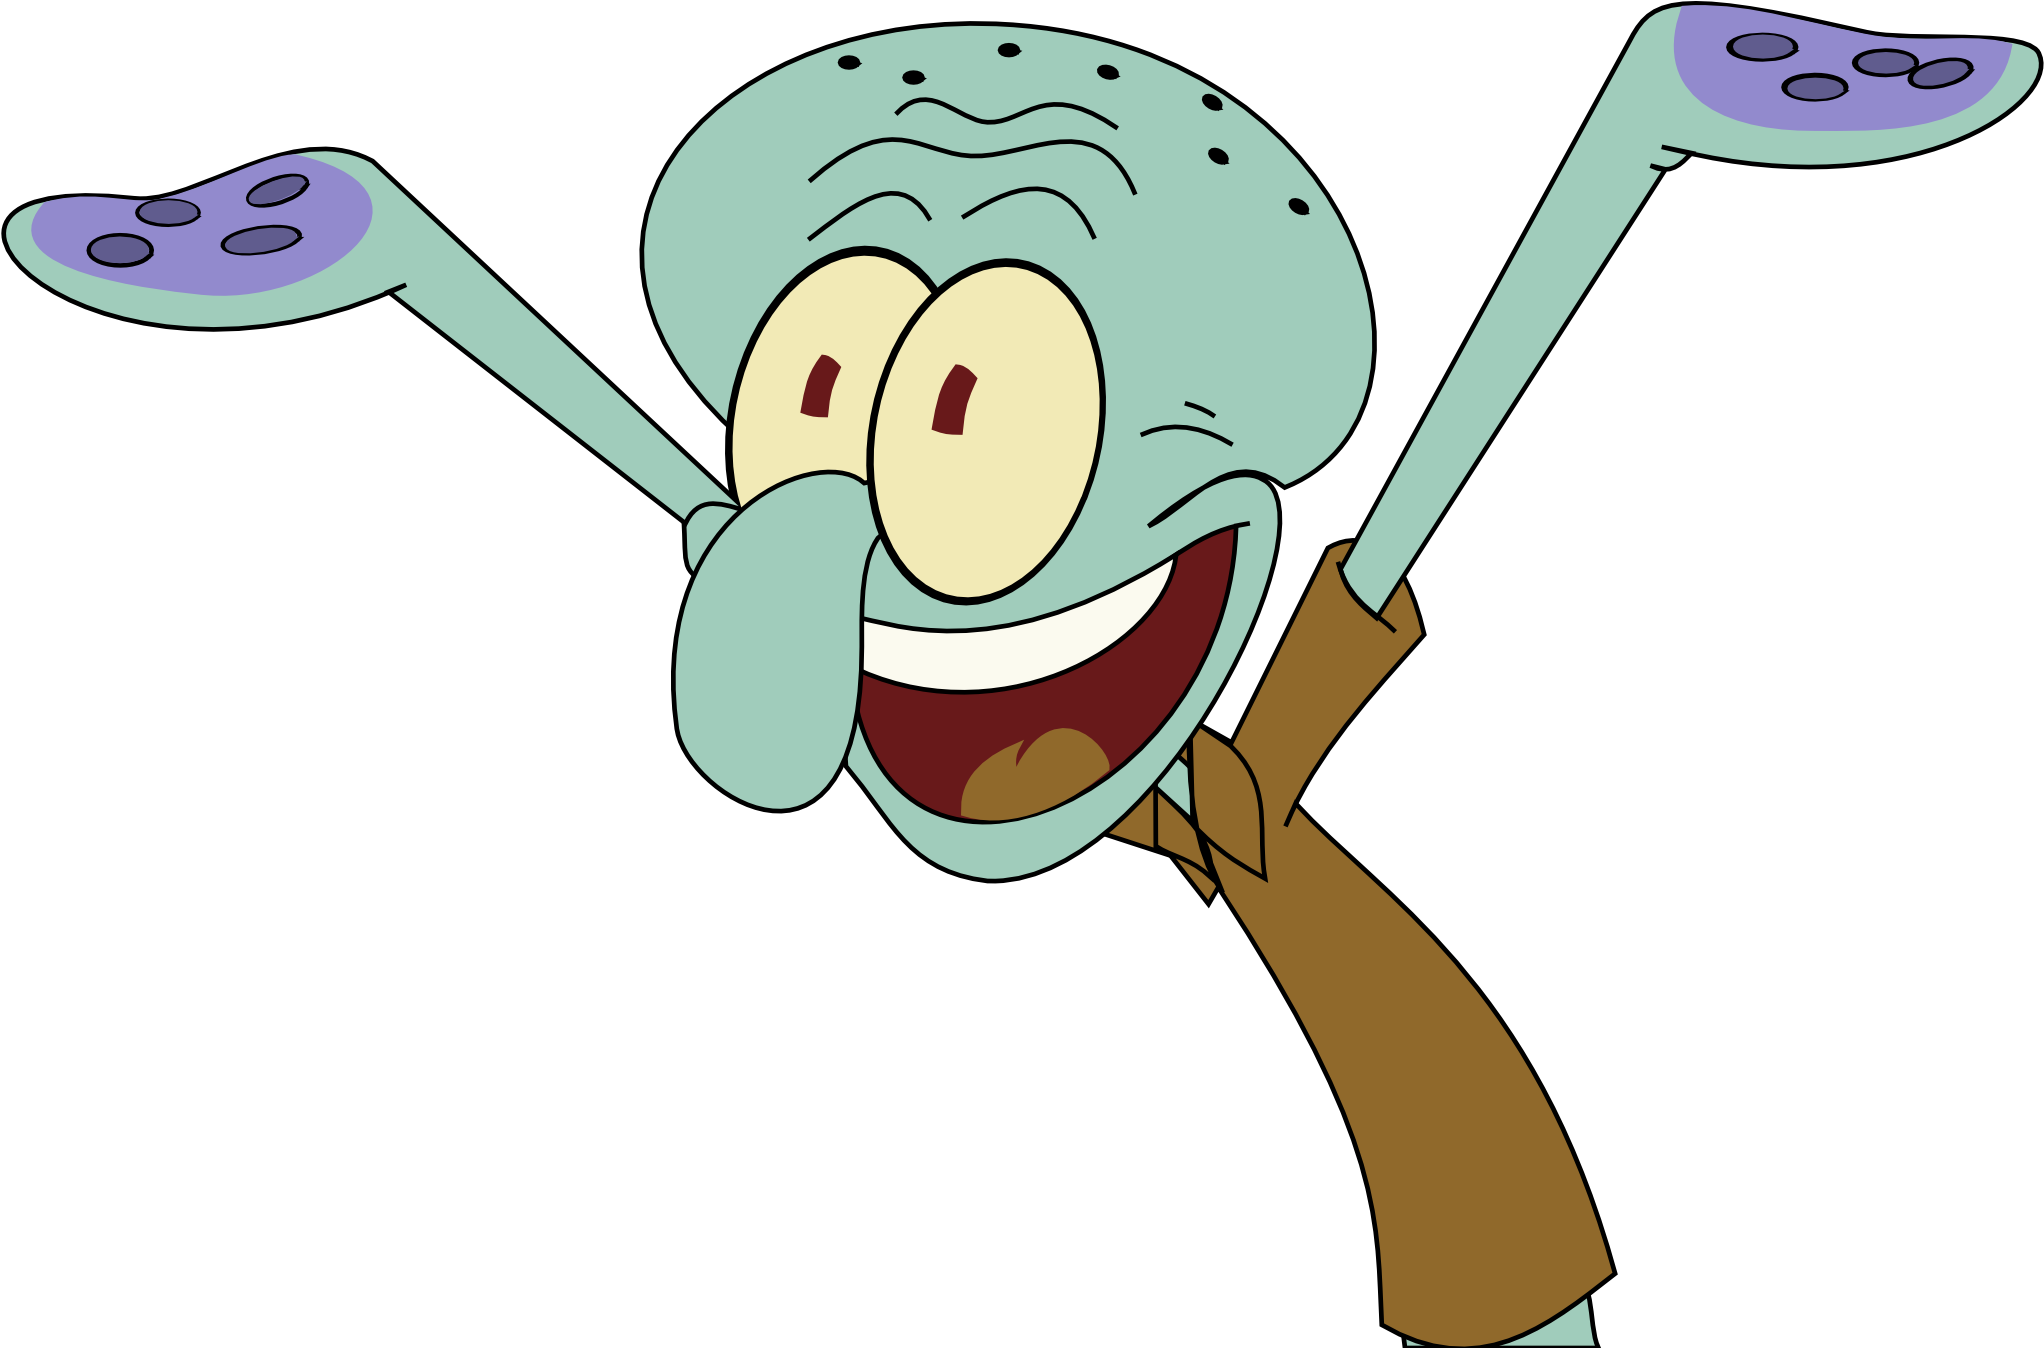 Energy Pictures Of Squidward Tentacles Useful Page - Squidward Tentacles (2199x1648)